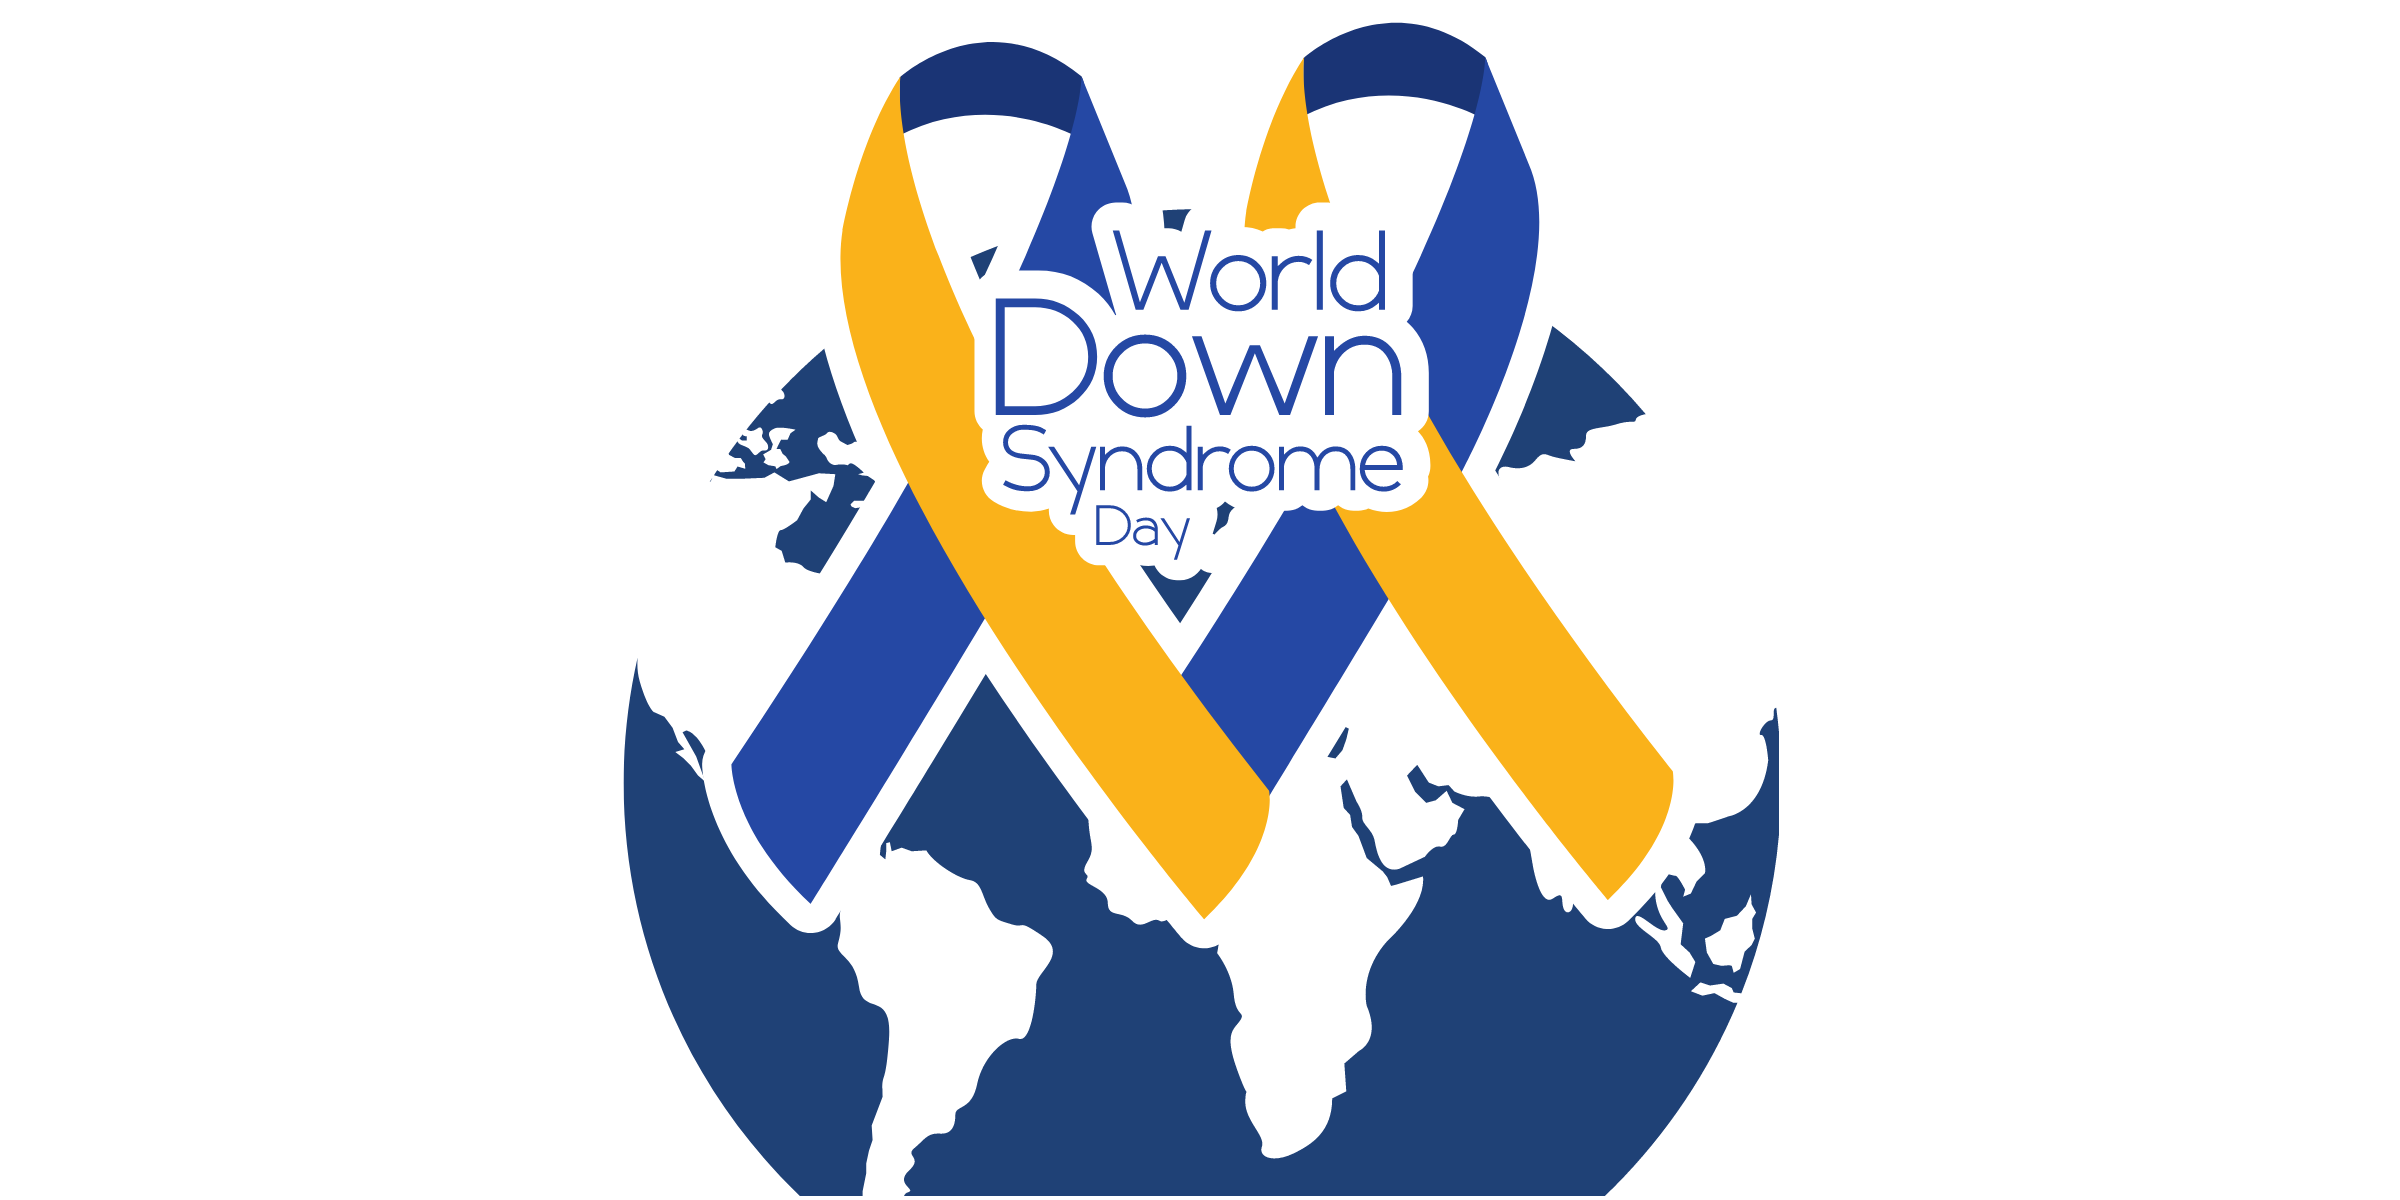 world down syndrome day